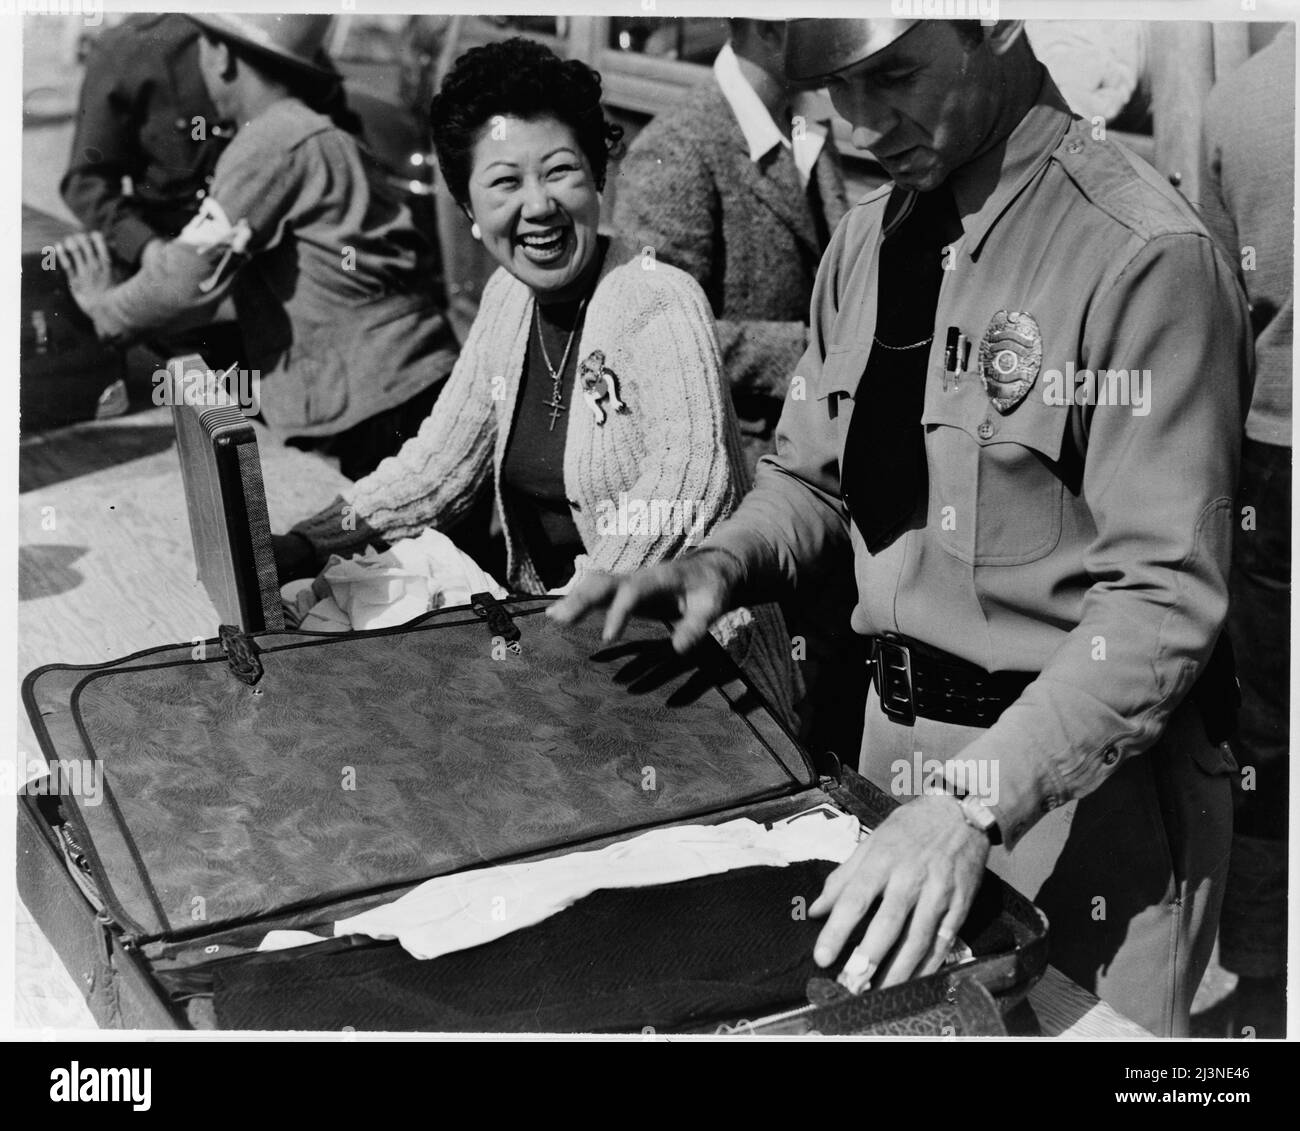 Japanese relocation, California. All baggage is inspected before newcomers enter the Santa Anita Park Assembly Center at Arcadia, California, for evacuees of Japanese ancestry. Evacuees are transferred later to War Relocation Authority centers for the duration. Stock Photo